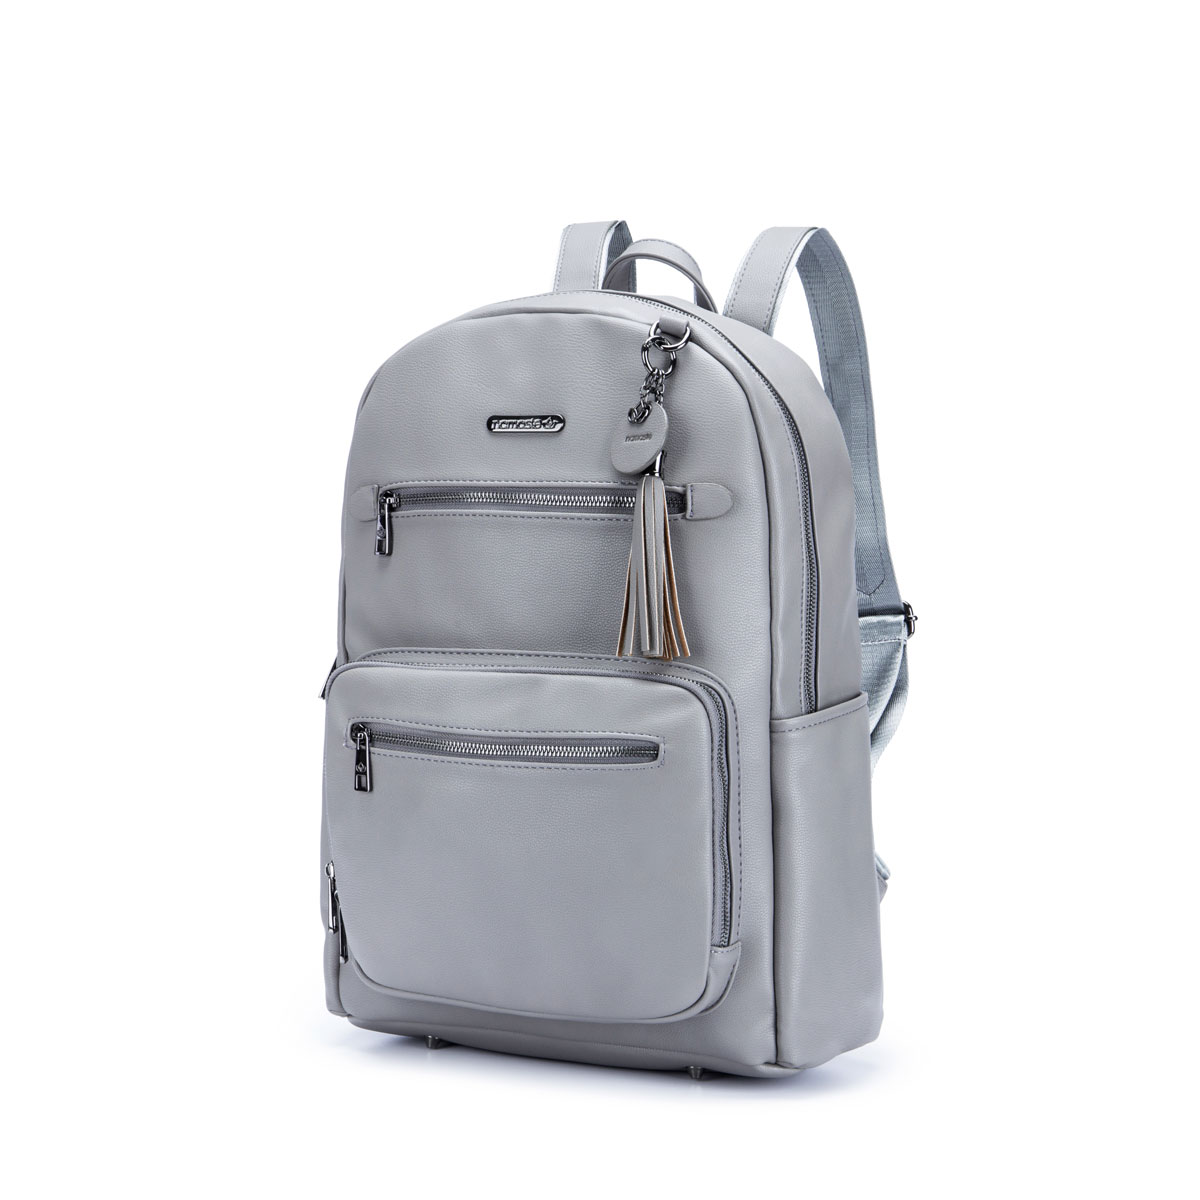 Namaste Maker's Backpack - Grey at Jimmy Beans Wool